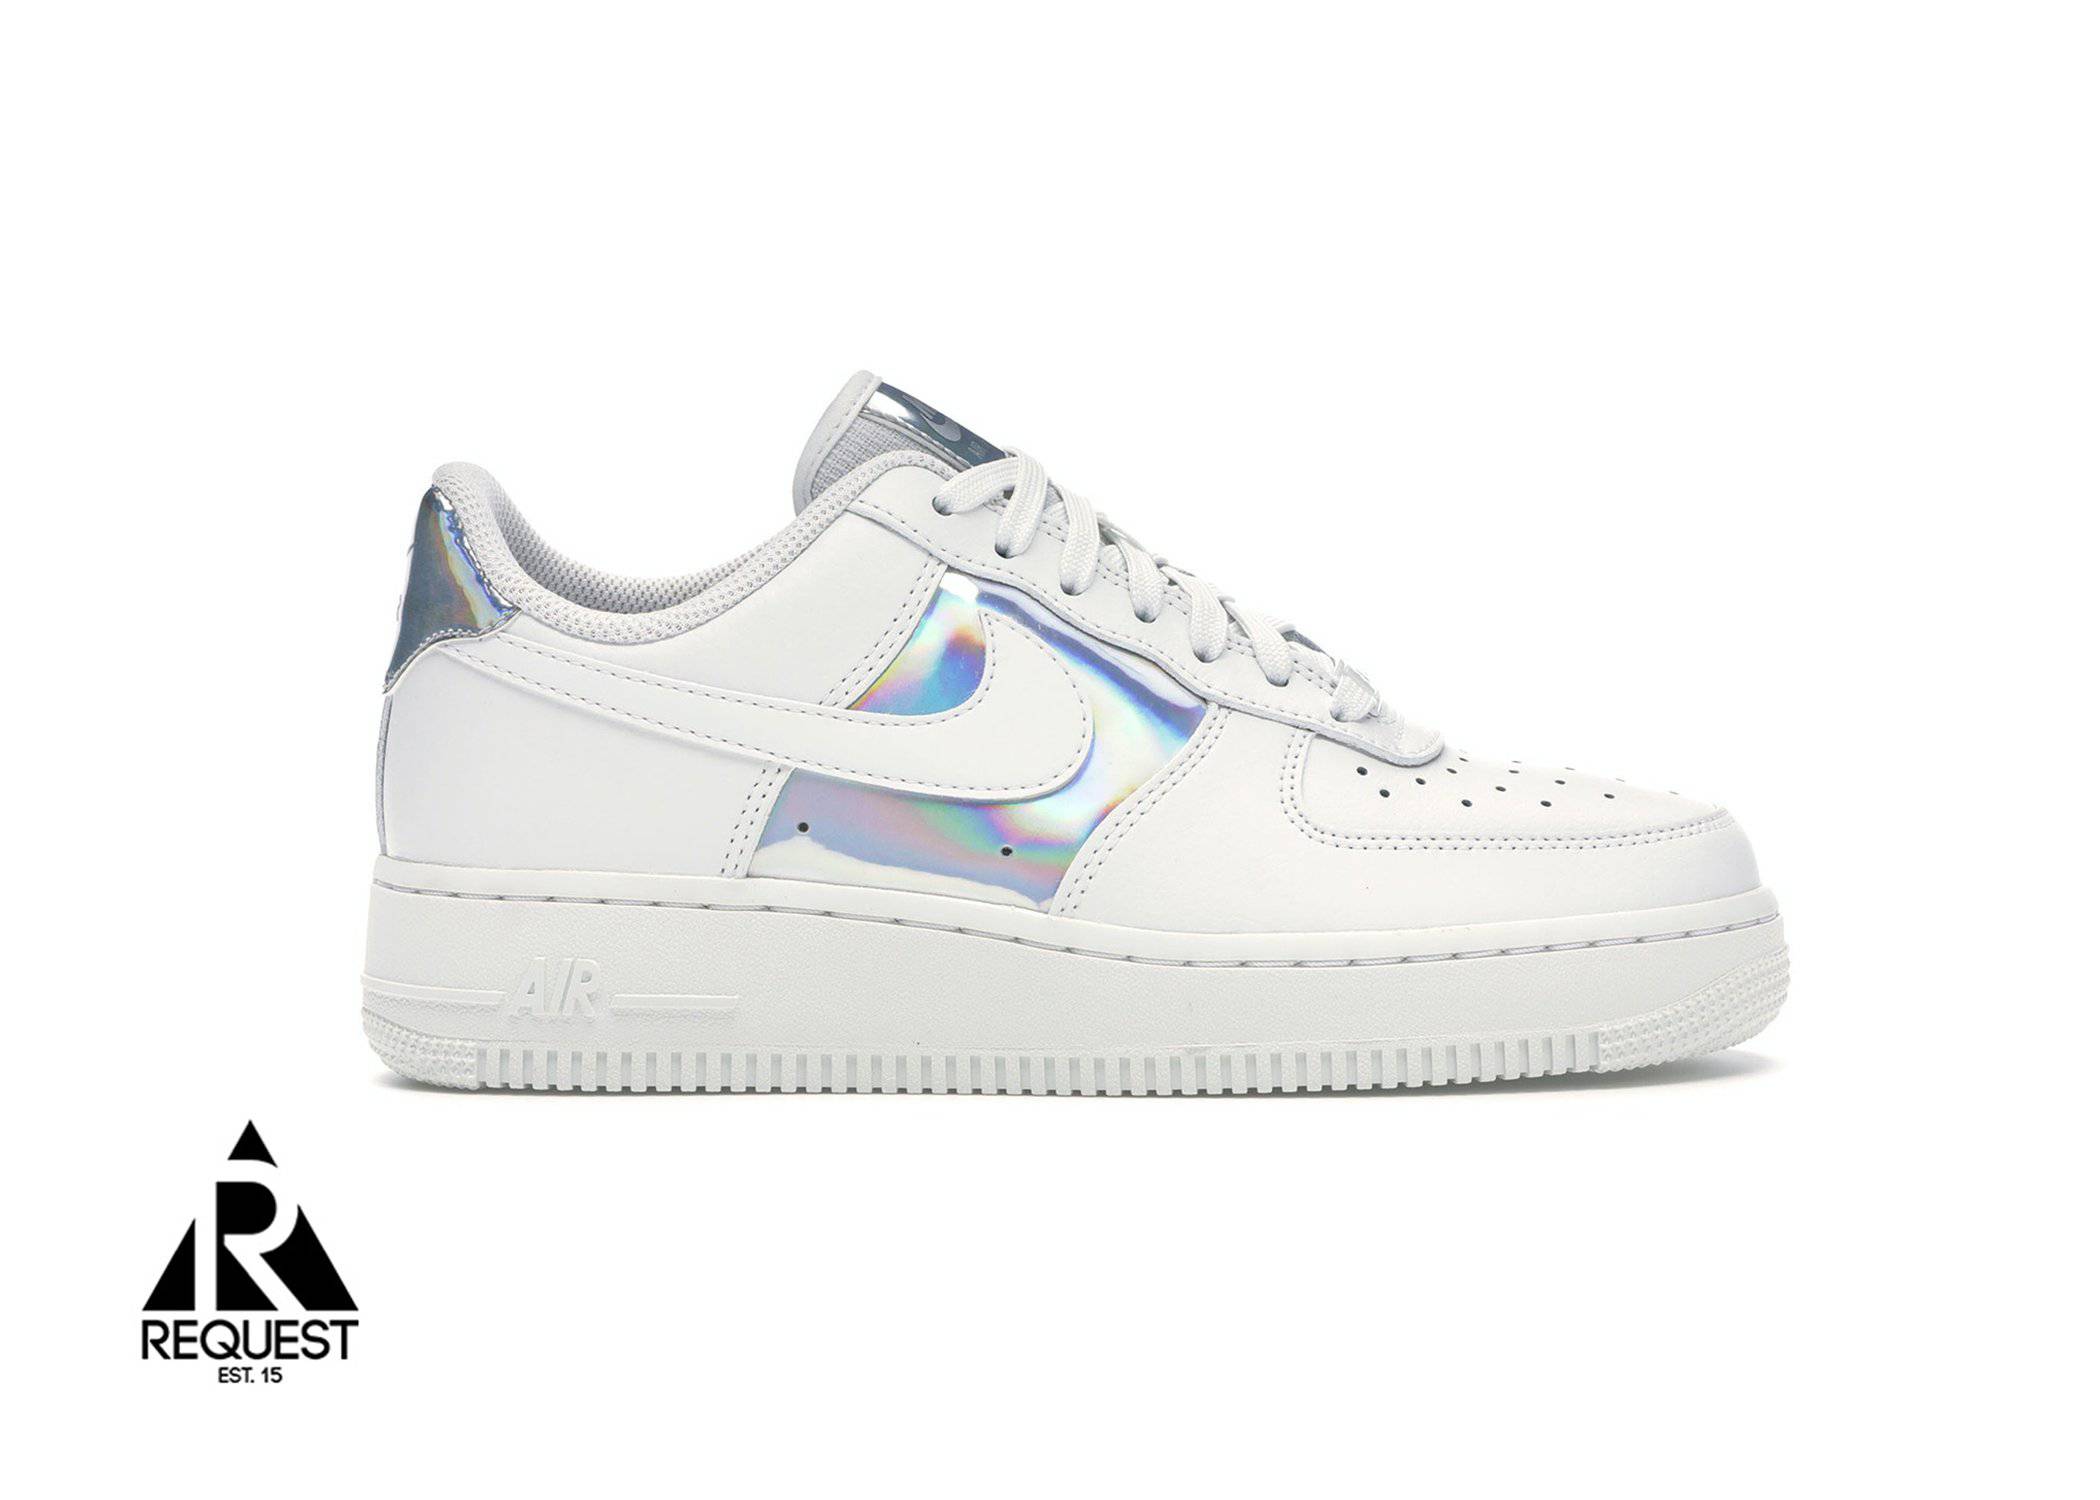 Air Force 1 Low “Iridescent”